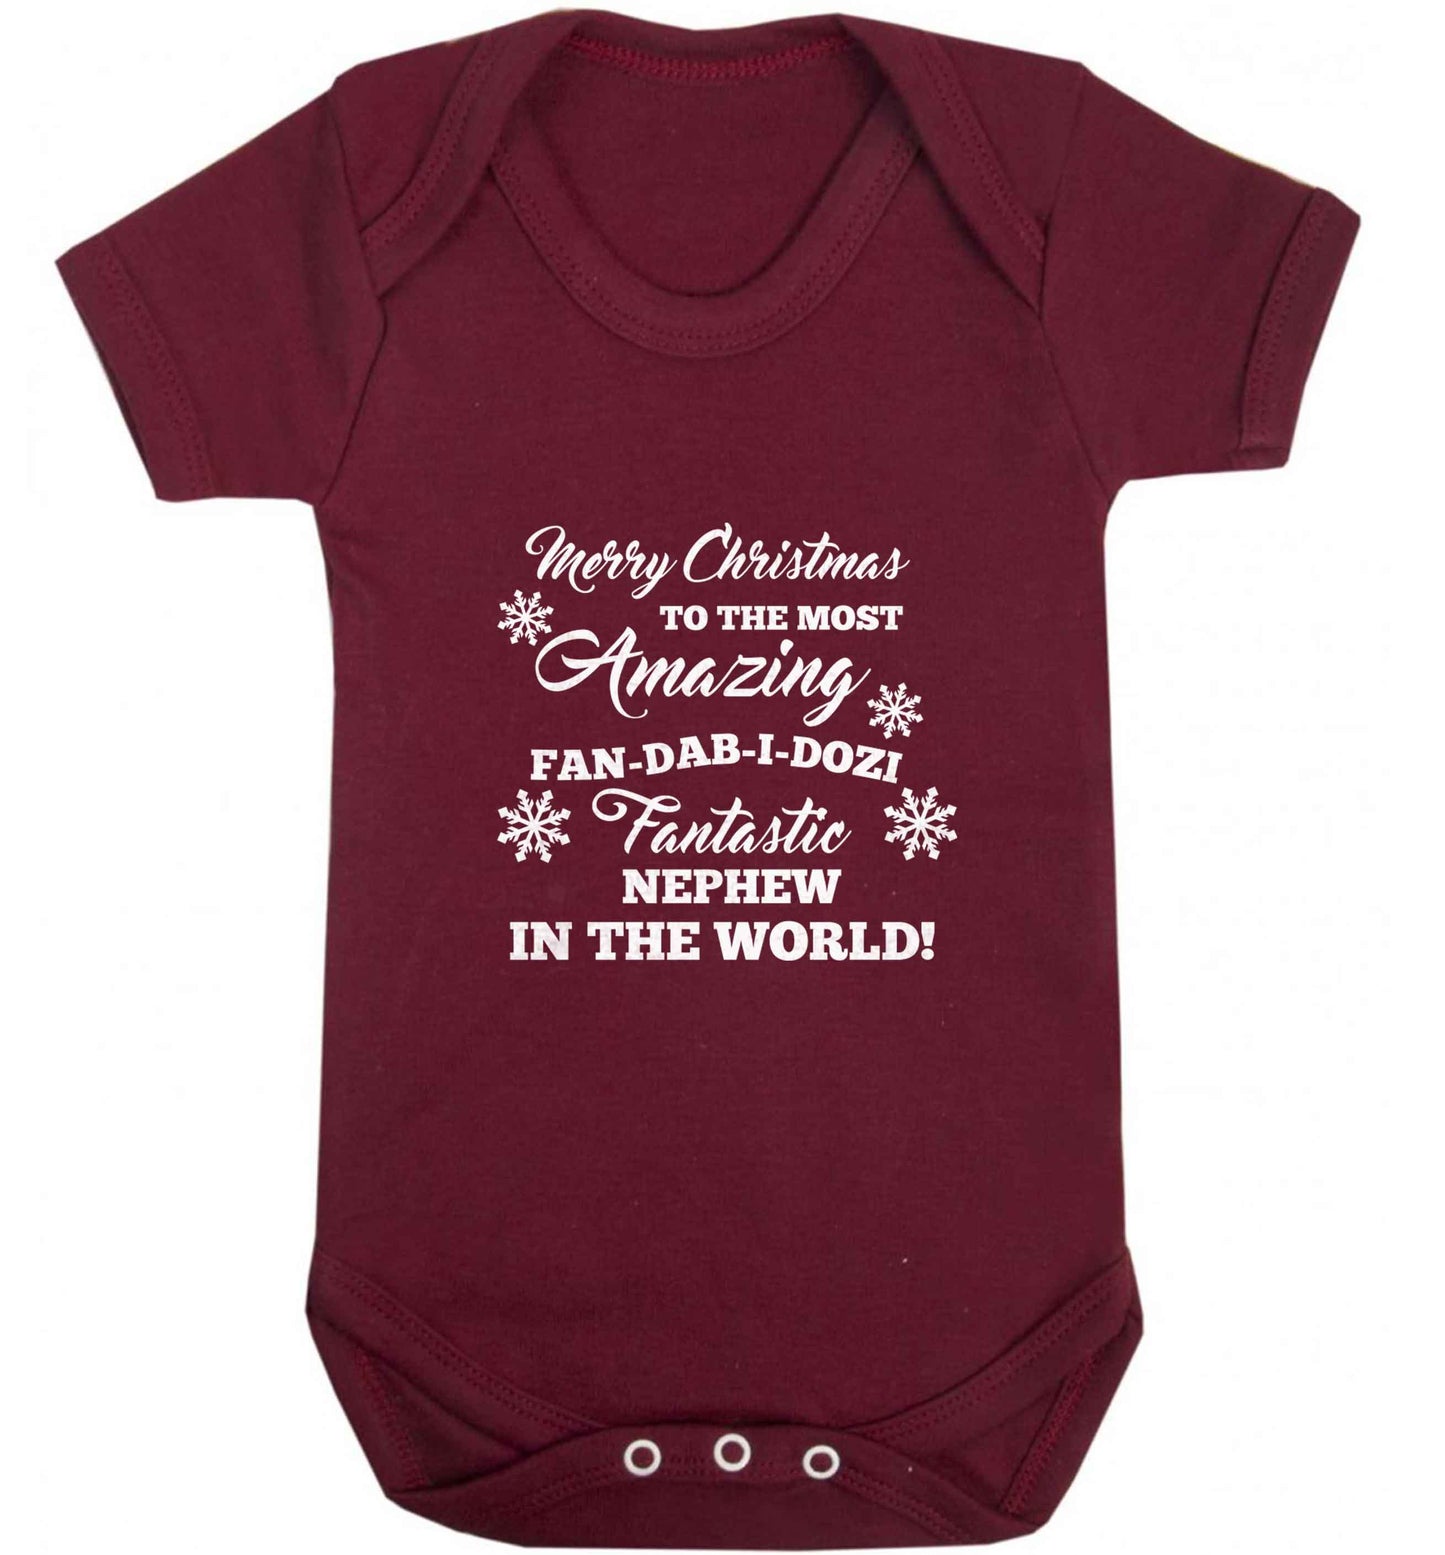 Merry Christmas to the most amazing fan-dab-i-dozi fantasic Nephew in the world baby vest maroon 18-24 months